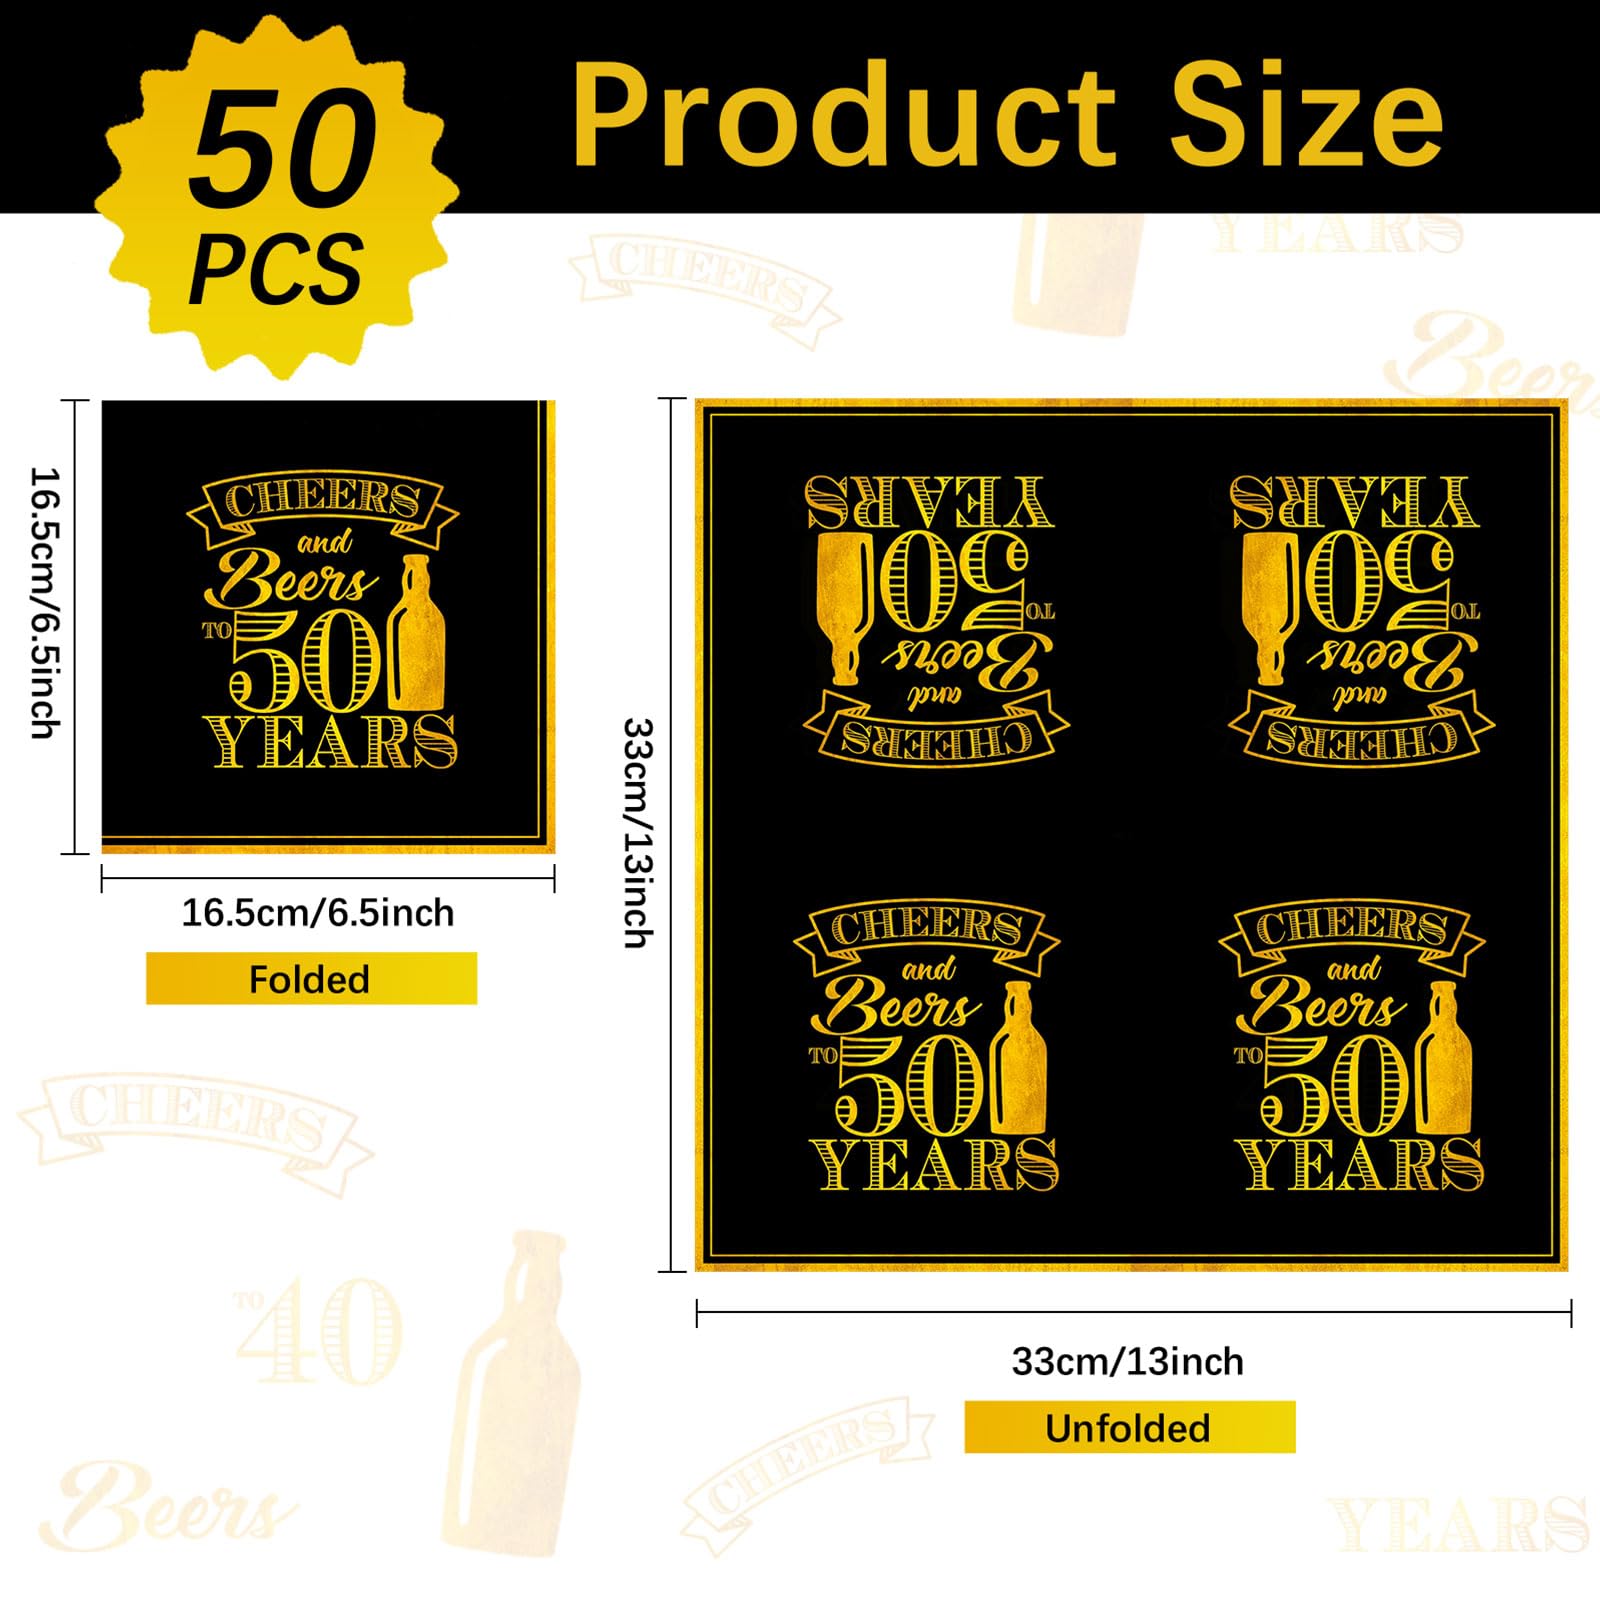 50 Pcs Cheers to 50 Years Party Napkins 50th Birthday Napkins 6.5x6.5 Inches Disposable Party Supplies Black and Gold Paper Napkins for Men Women 50th Birthday Decorations Wedding Anniversary